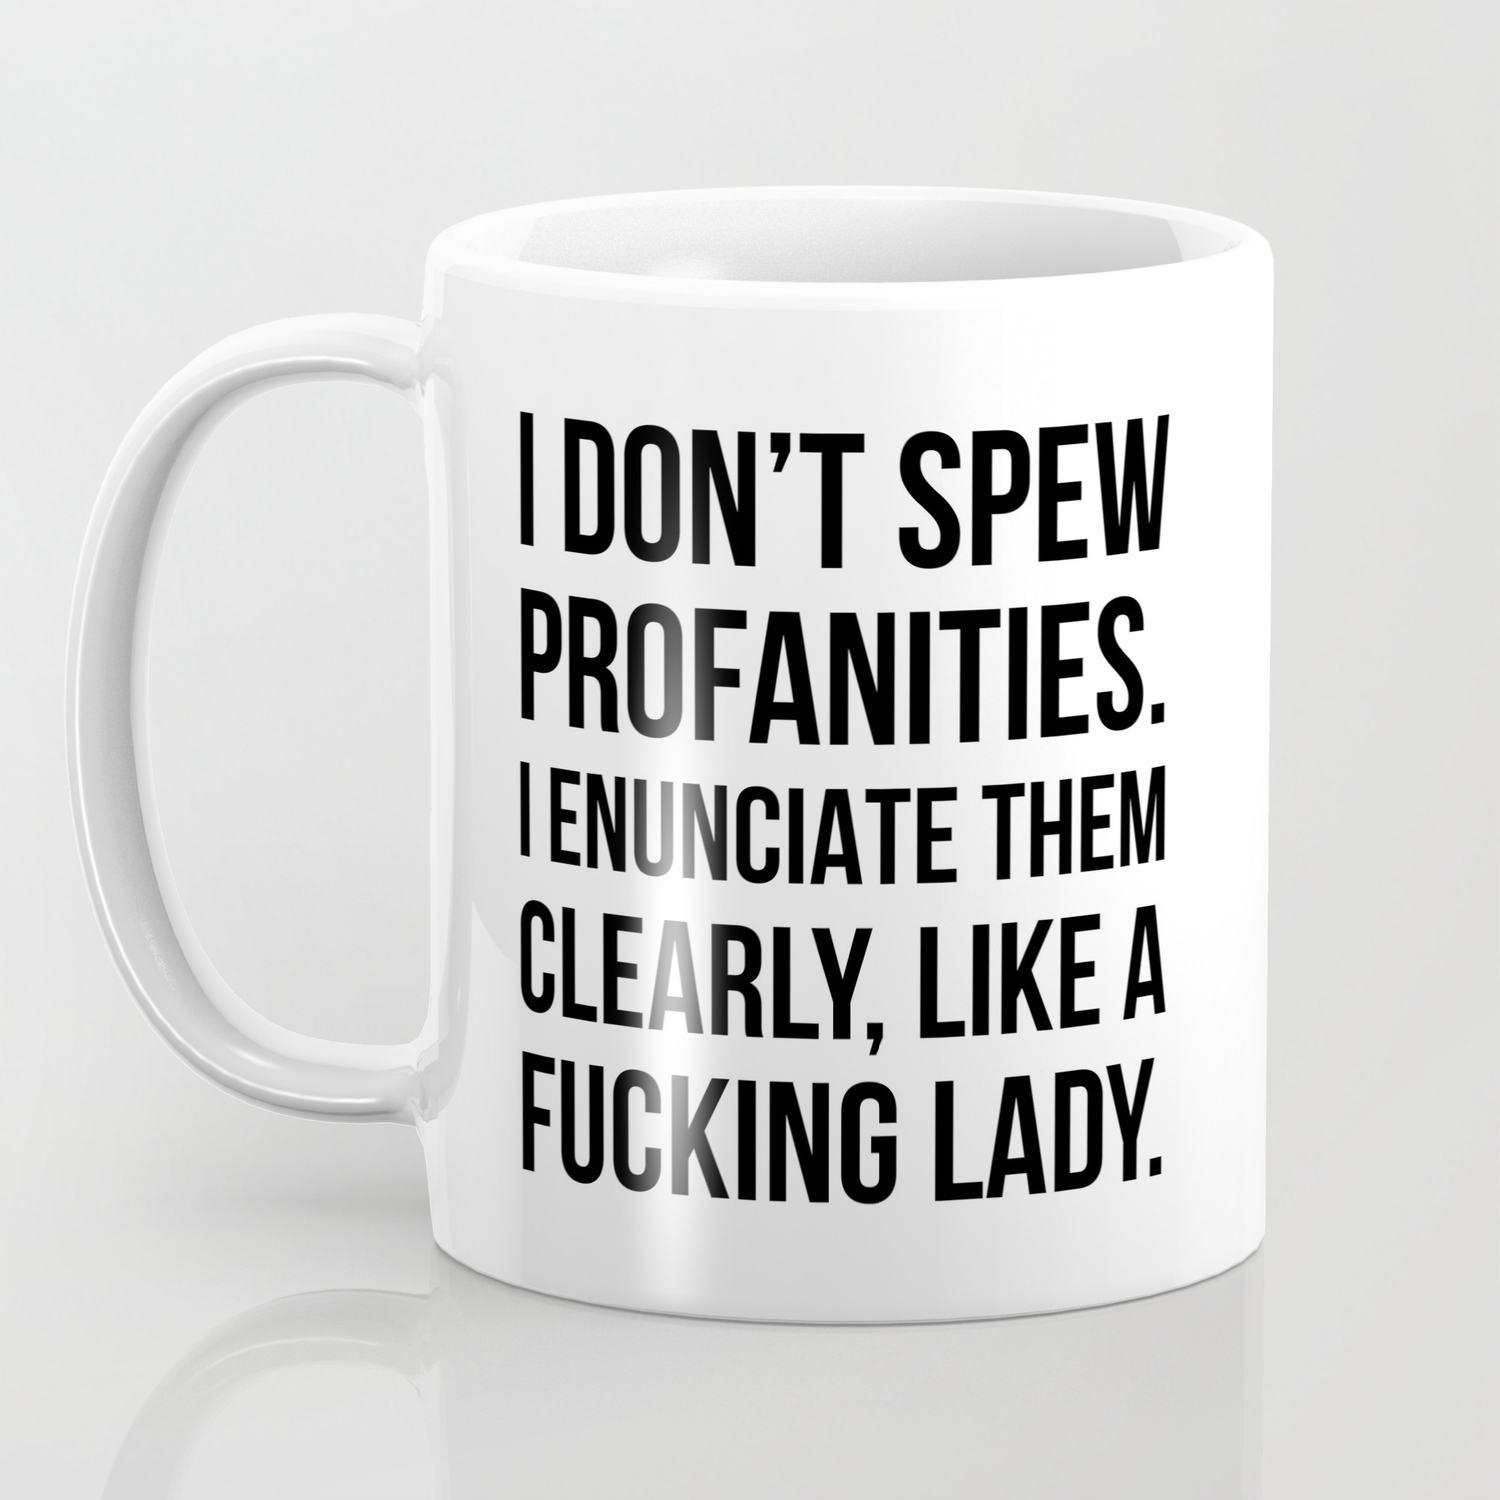 I enunciate them like a fing Lady Coffee Cup Mug I Dont Spew Profanities Funny Cute Gift Printed both sides for Left or Right hands Made in the USA I enunciate them like a f'ing Lady Coffee Cup Mug itsaskin1 11oz Awesome